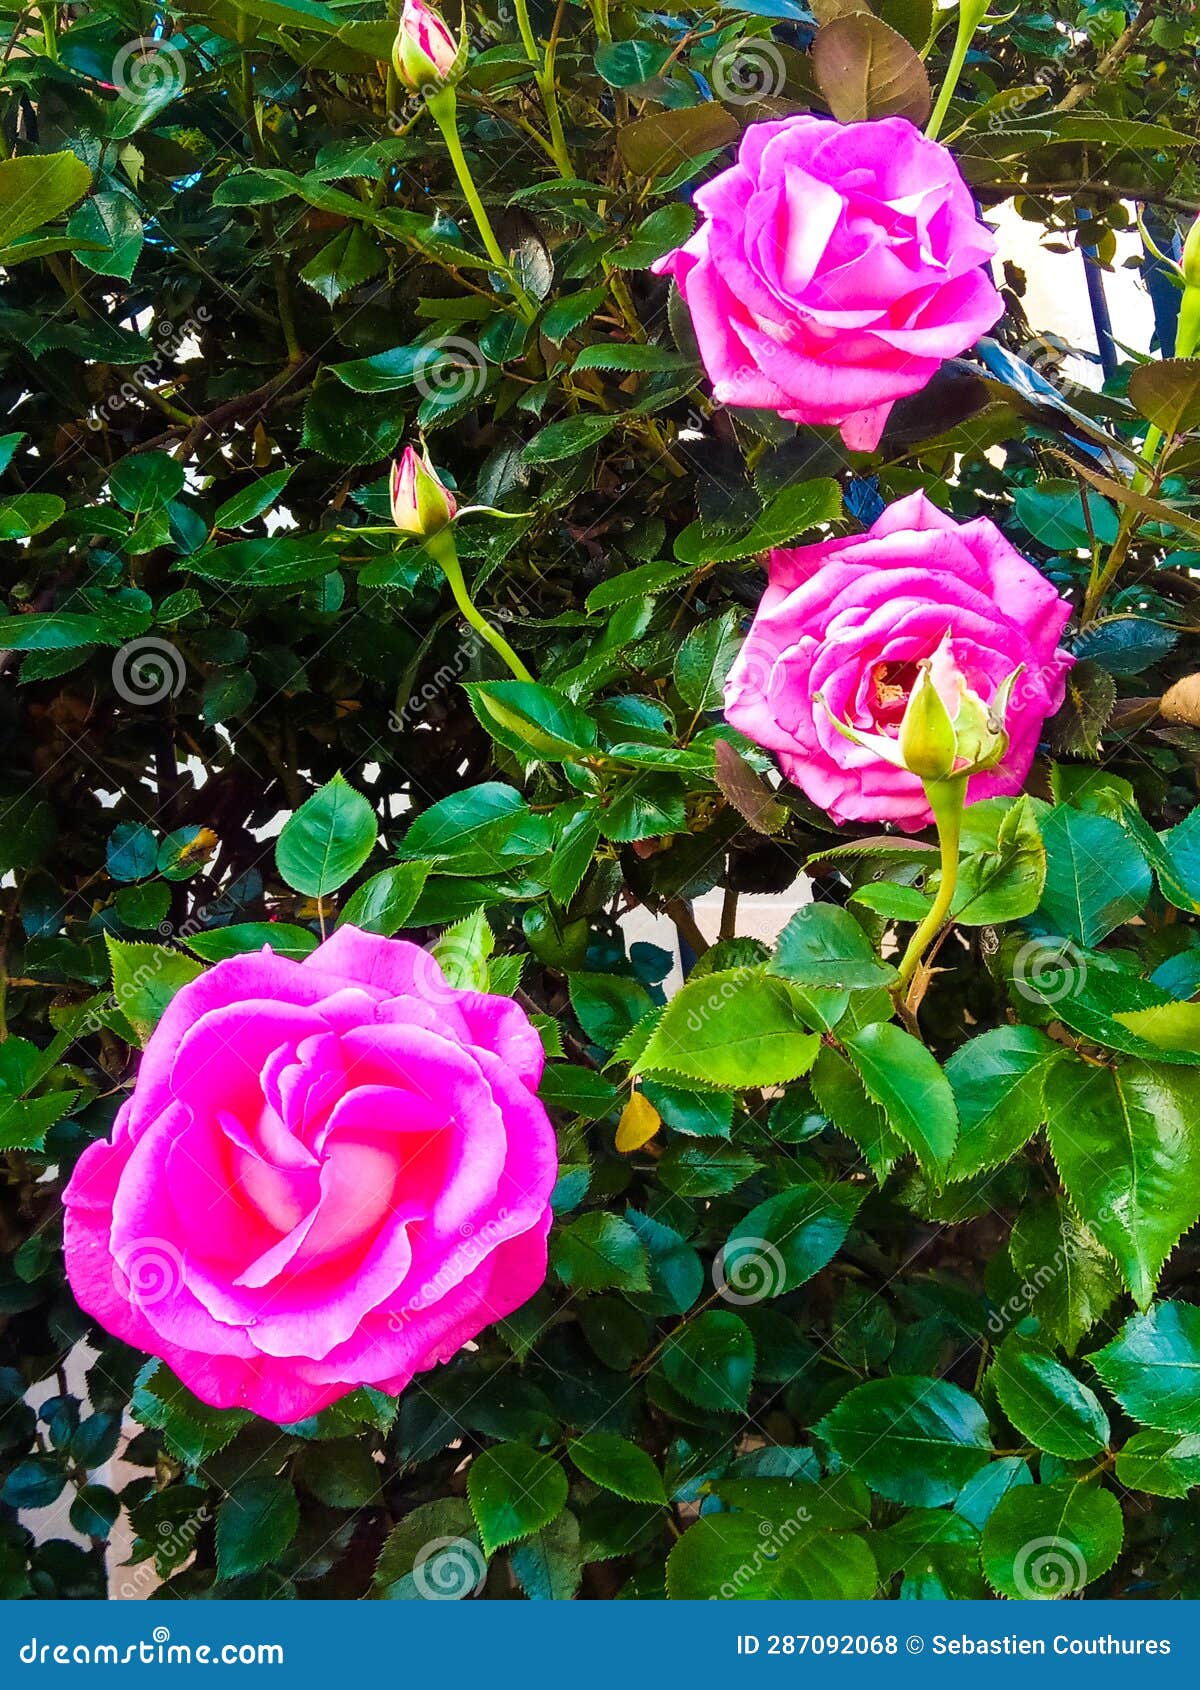 magnificent roses (rosa) of pink color growing on a rosebush